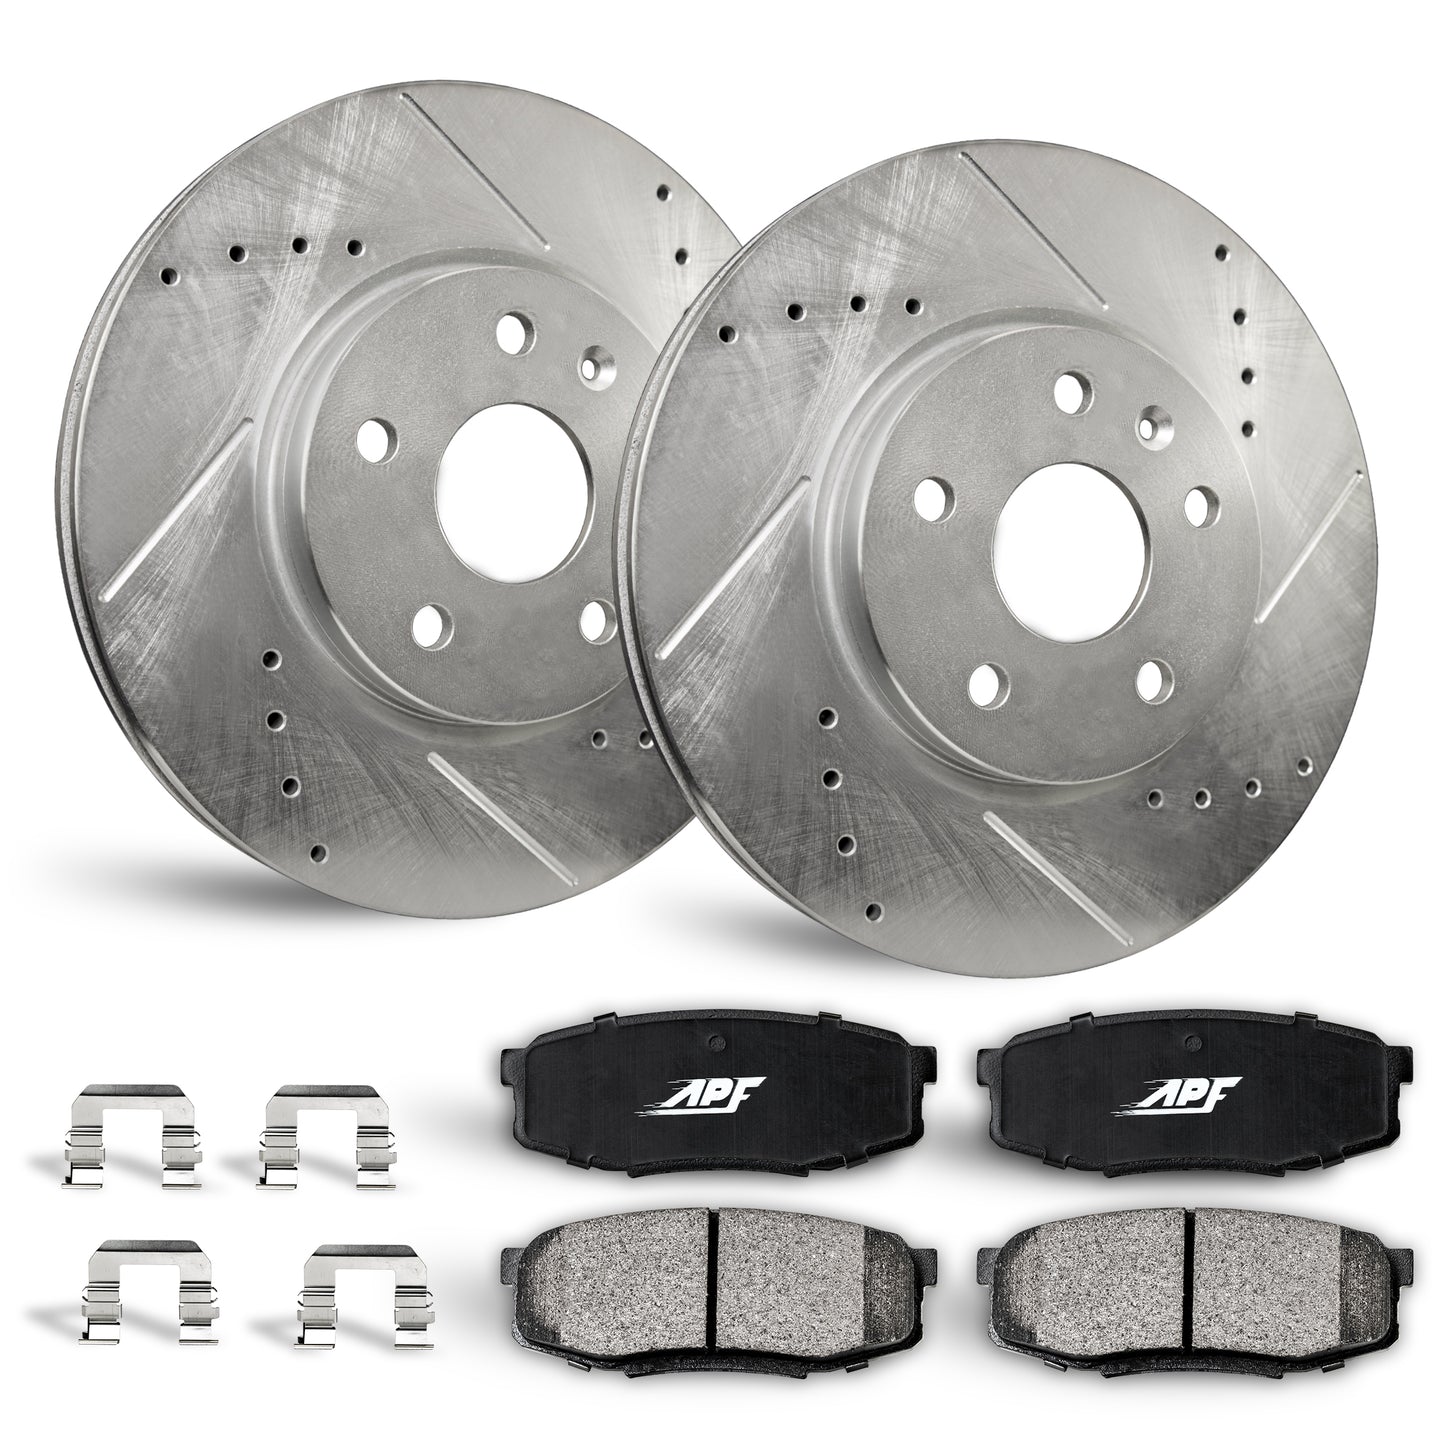 APF Rear Brake Kit compatible with Lexus GS460 2008-2011 | Zinc Drilled Slotted Rotors with Ceramic Carbon Fiber Brake Pads